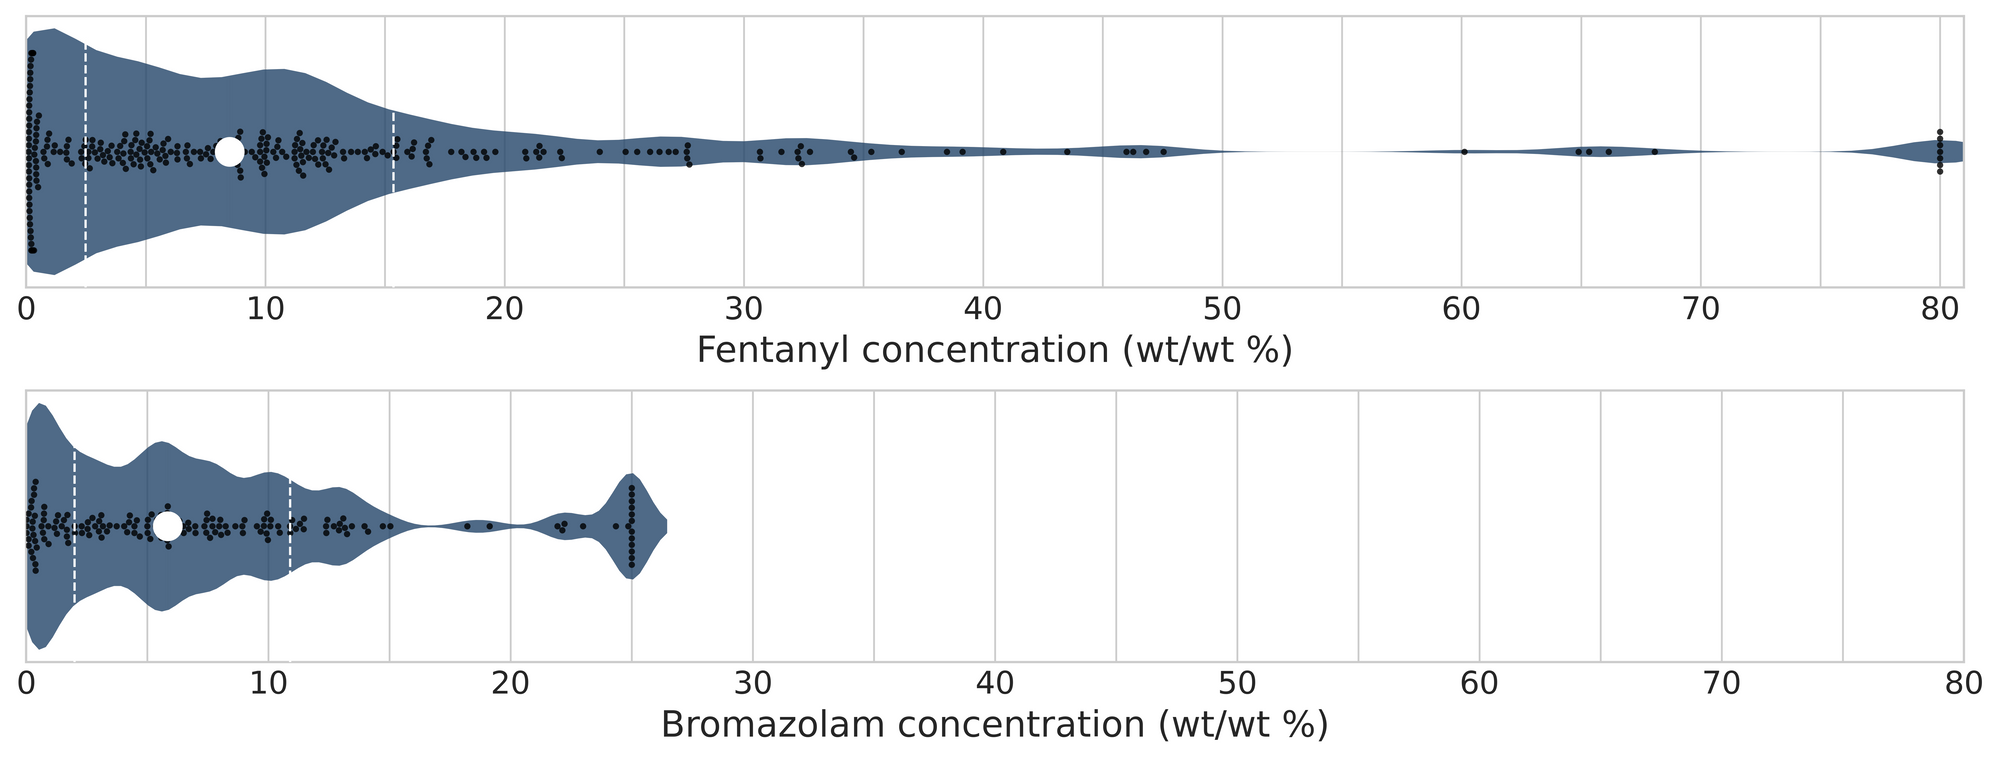 Figure 4. Violin plots of fentanyl (top panel) and bromazolam (bottom) positive samples quanitifed during September across all collection locations/methods.